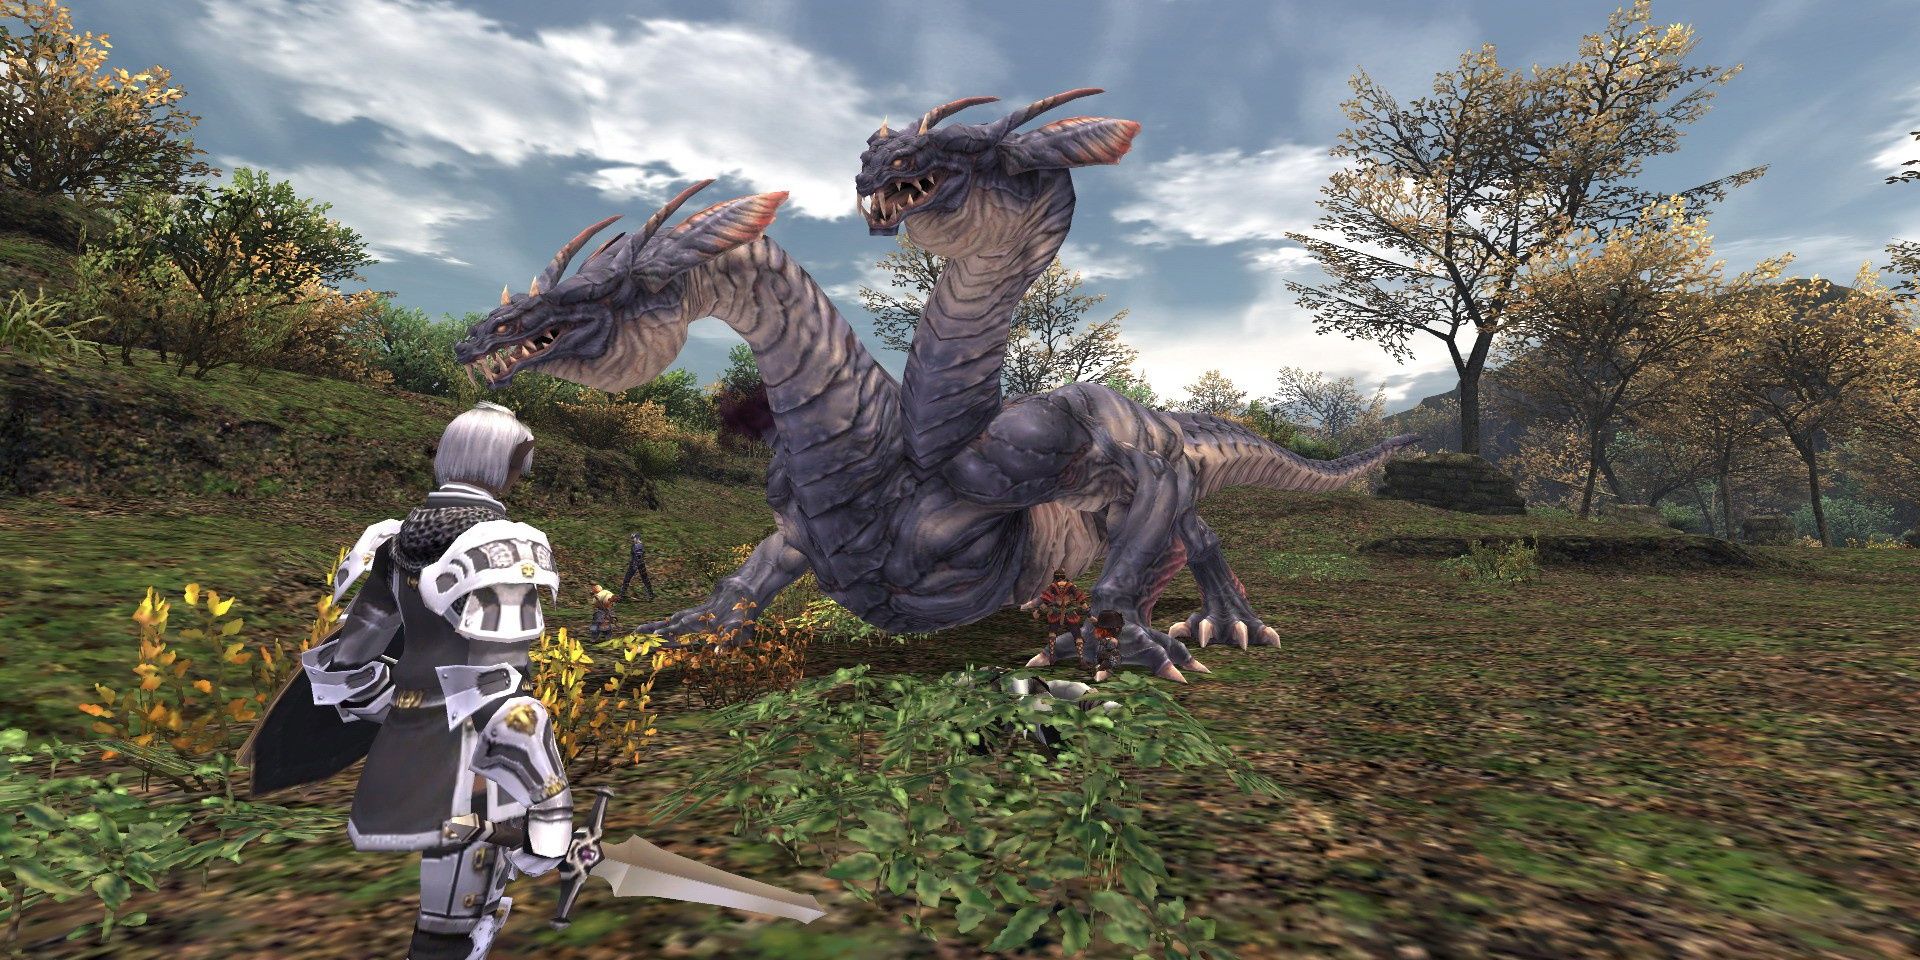 Final Fantasy XI Online combat two-heased dragon knight in plate